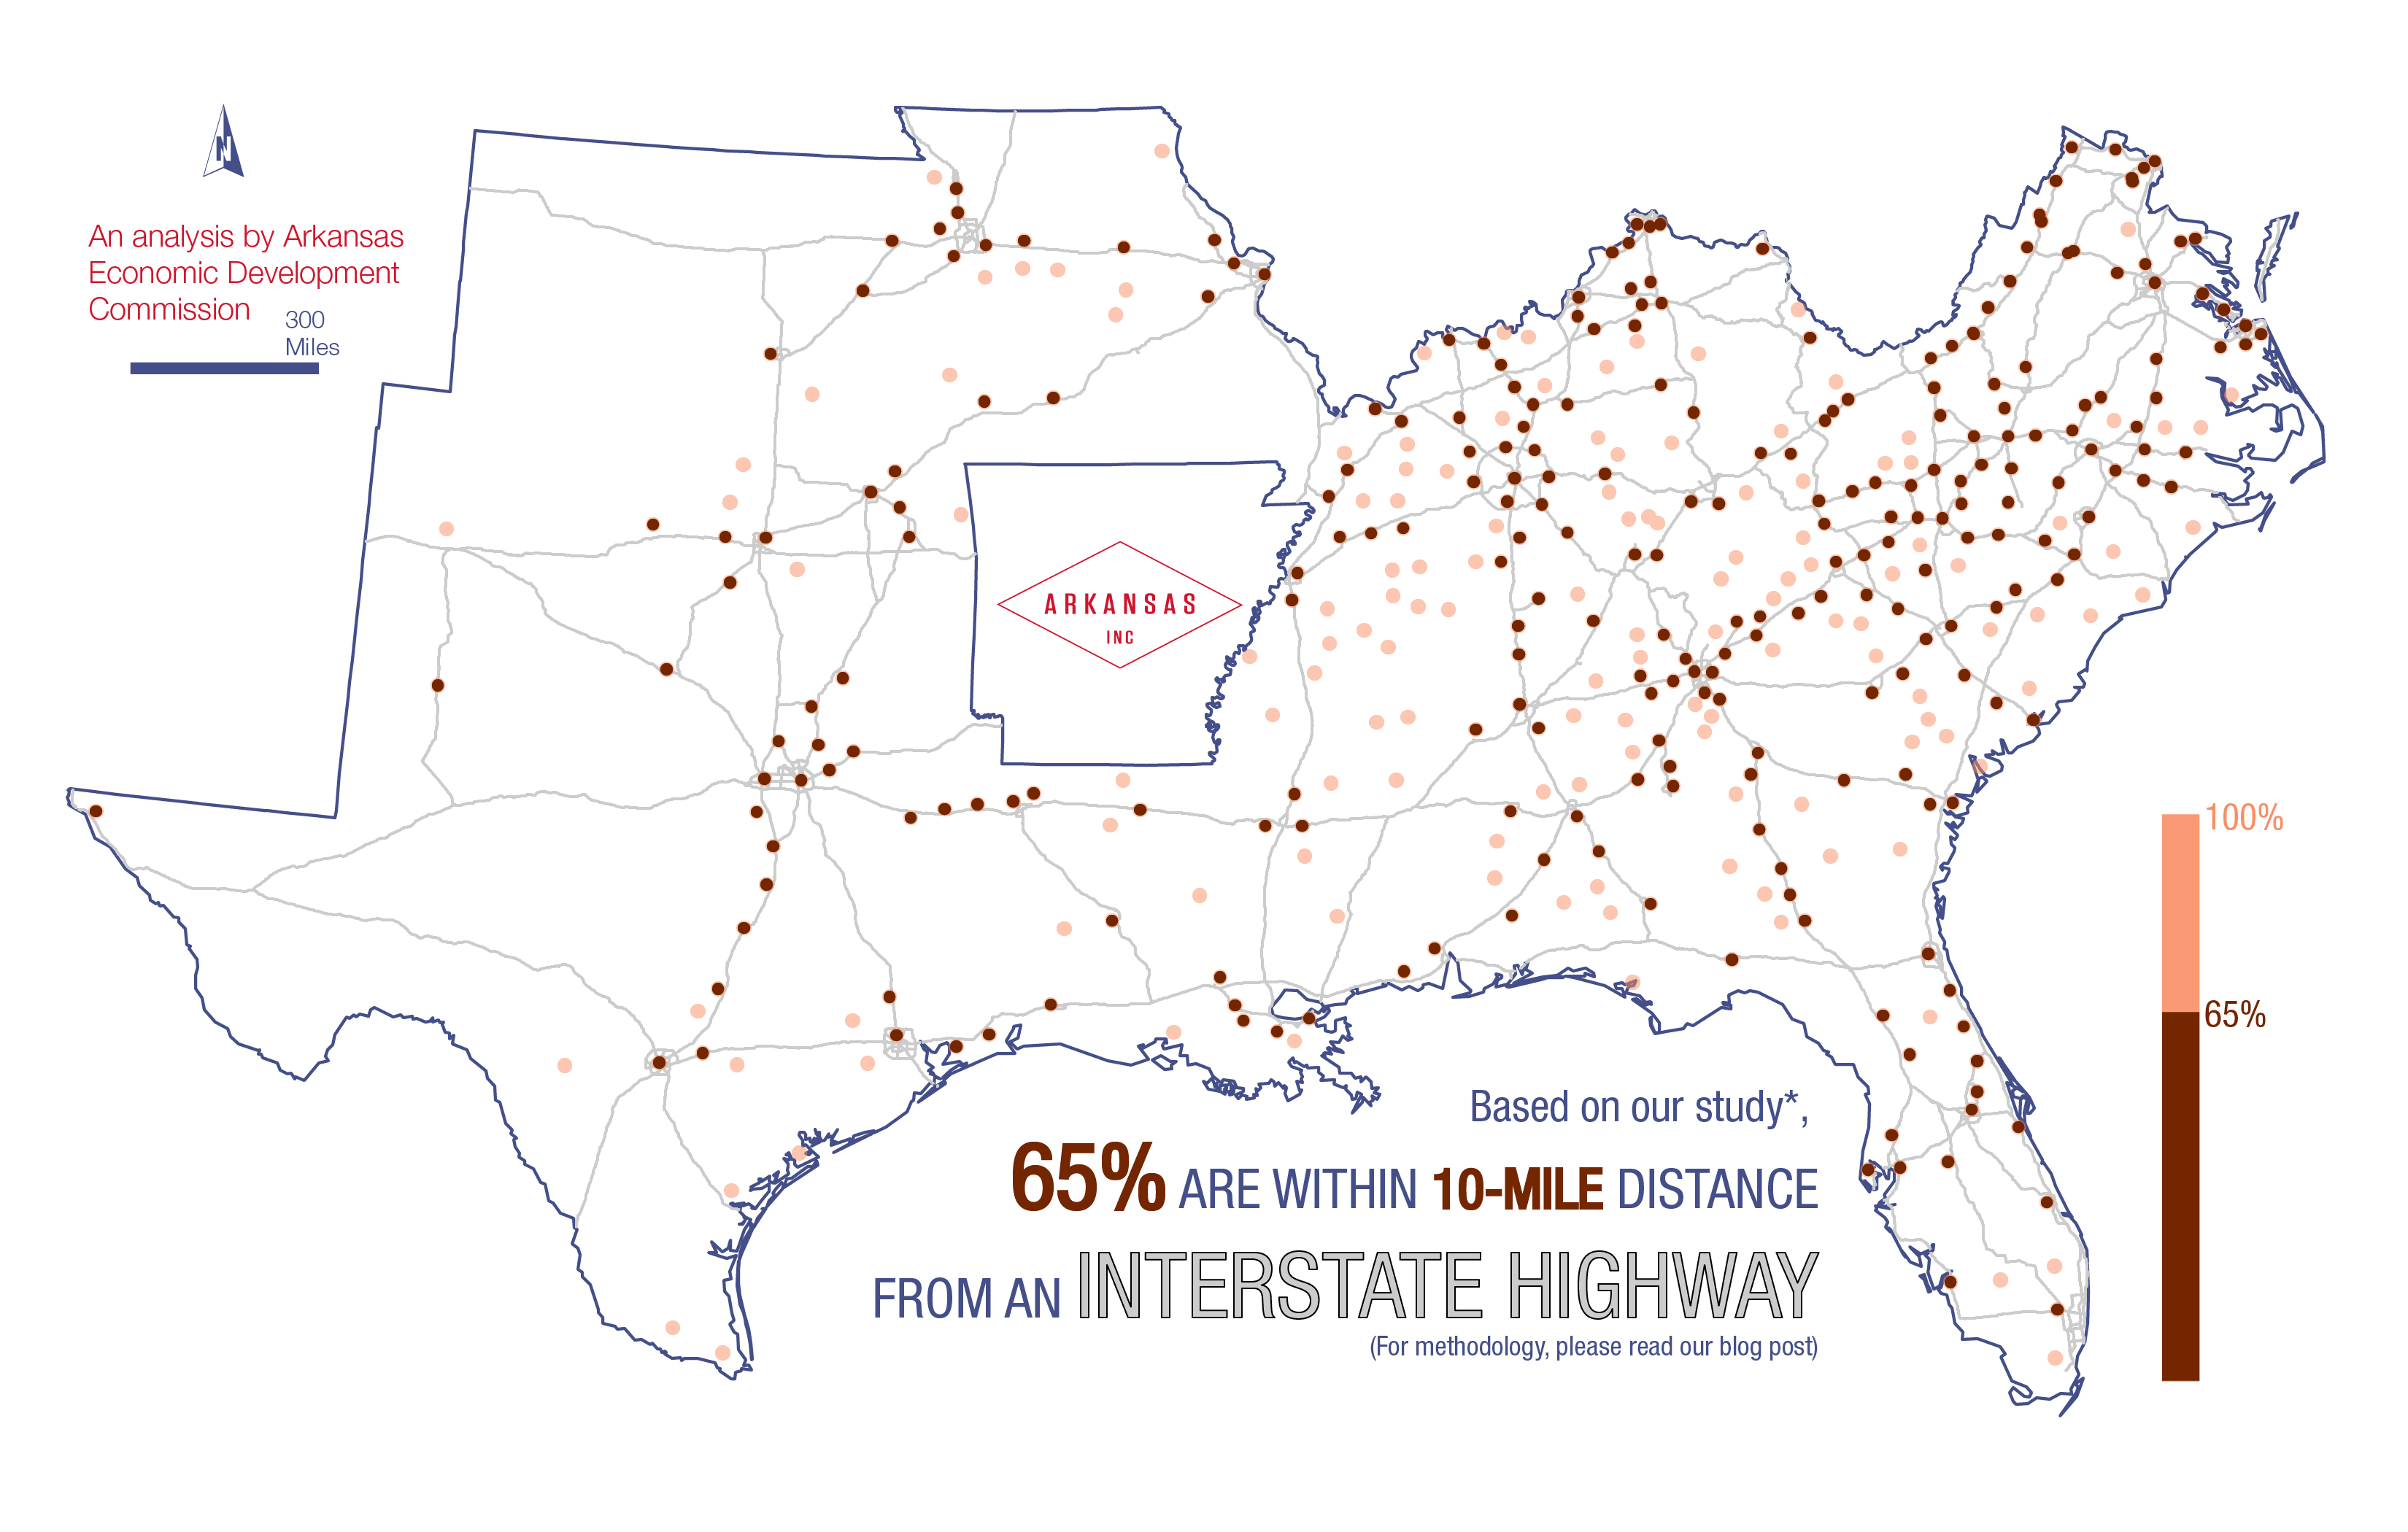 65% of qualified investments are located within a 10-mile distance from an interstate